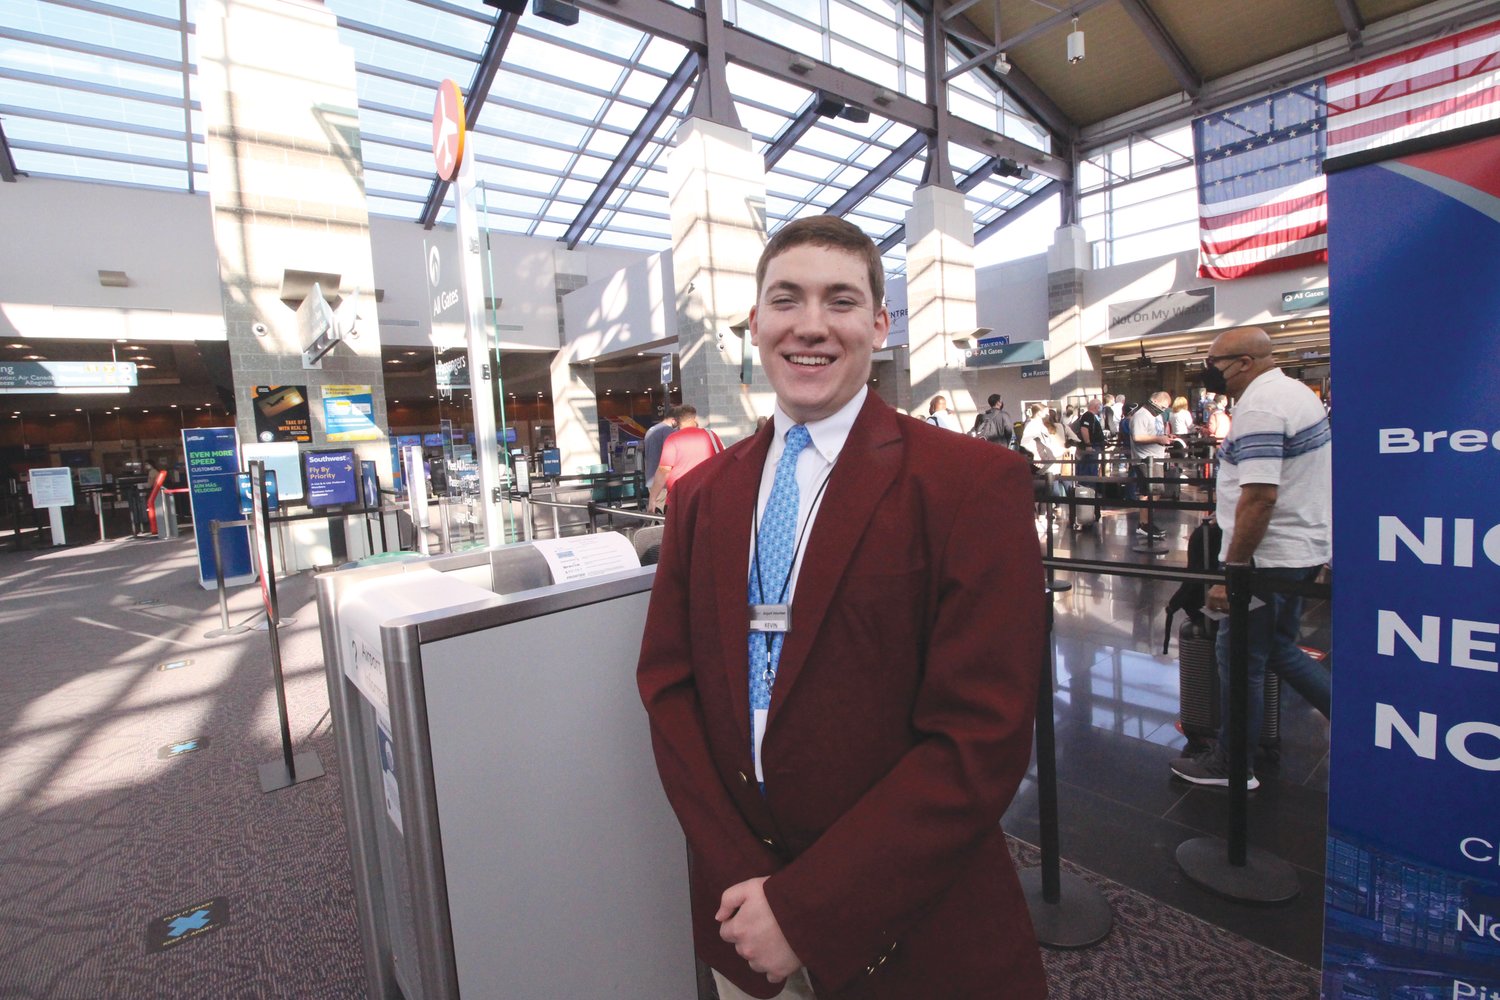 NO END OF QUESTIONS: Providence College sophomore Kevin Sawyer said days vary at the airport. Some days, he said, scores of different people are asking him the same question, whereas on other days the questions are all different.